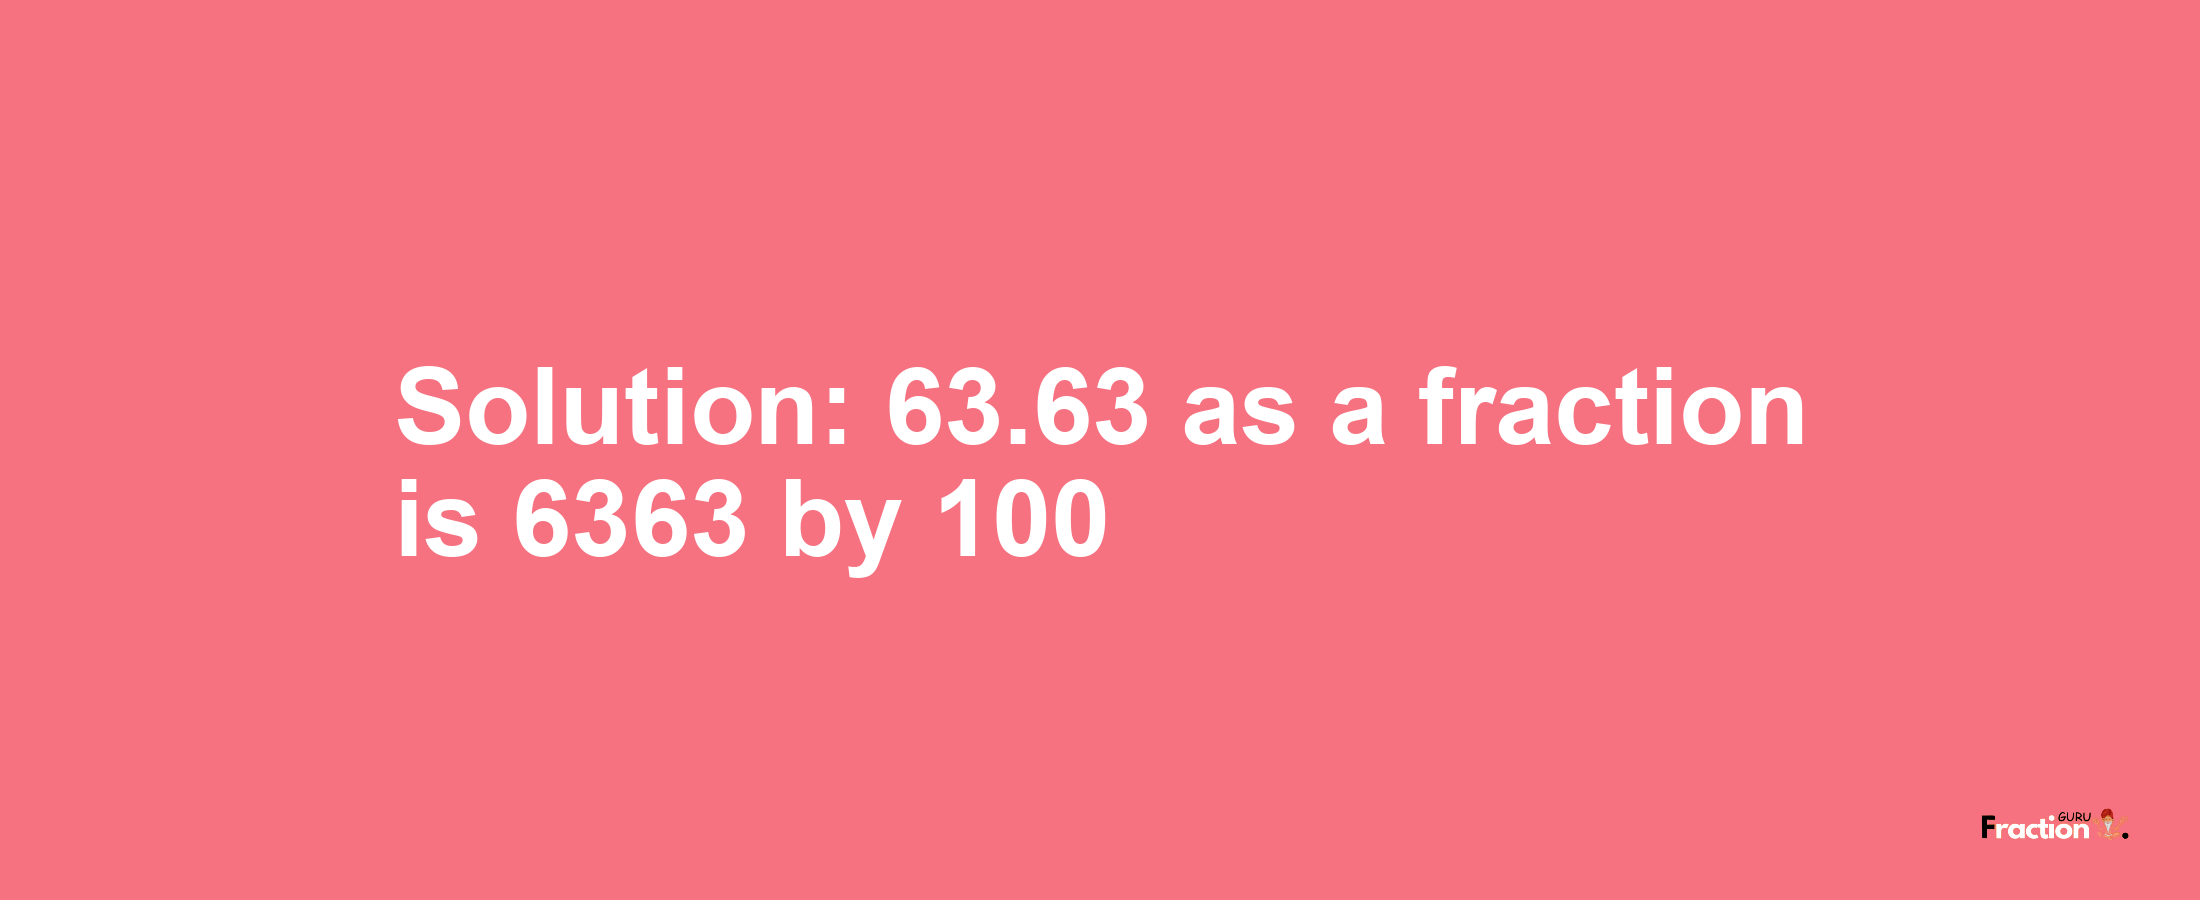 Solution:63.63 as a fraction is 6363/100